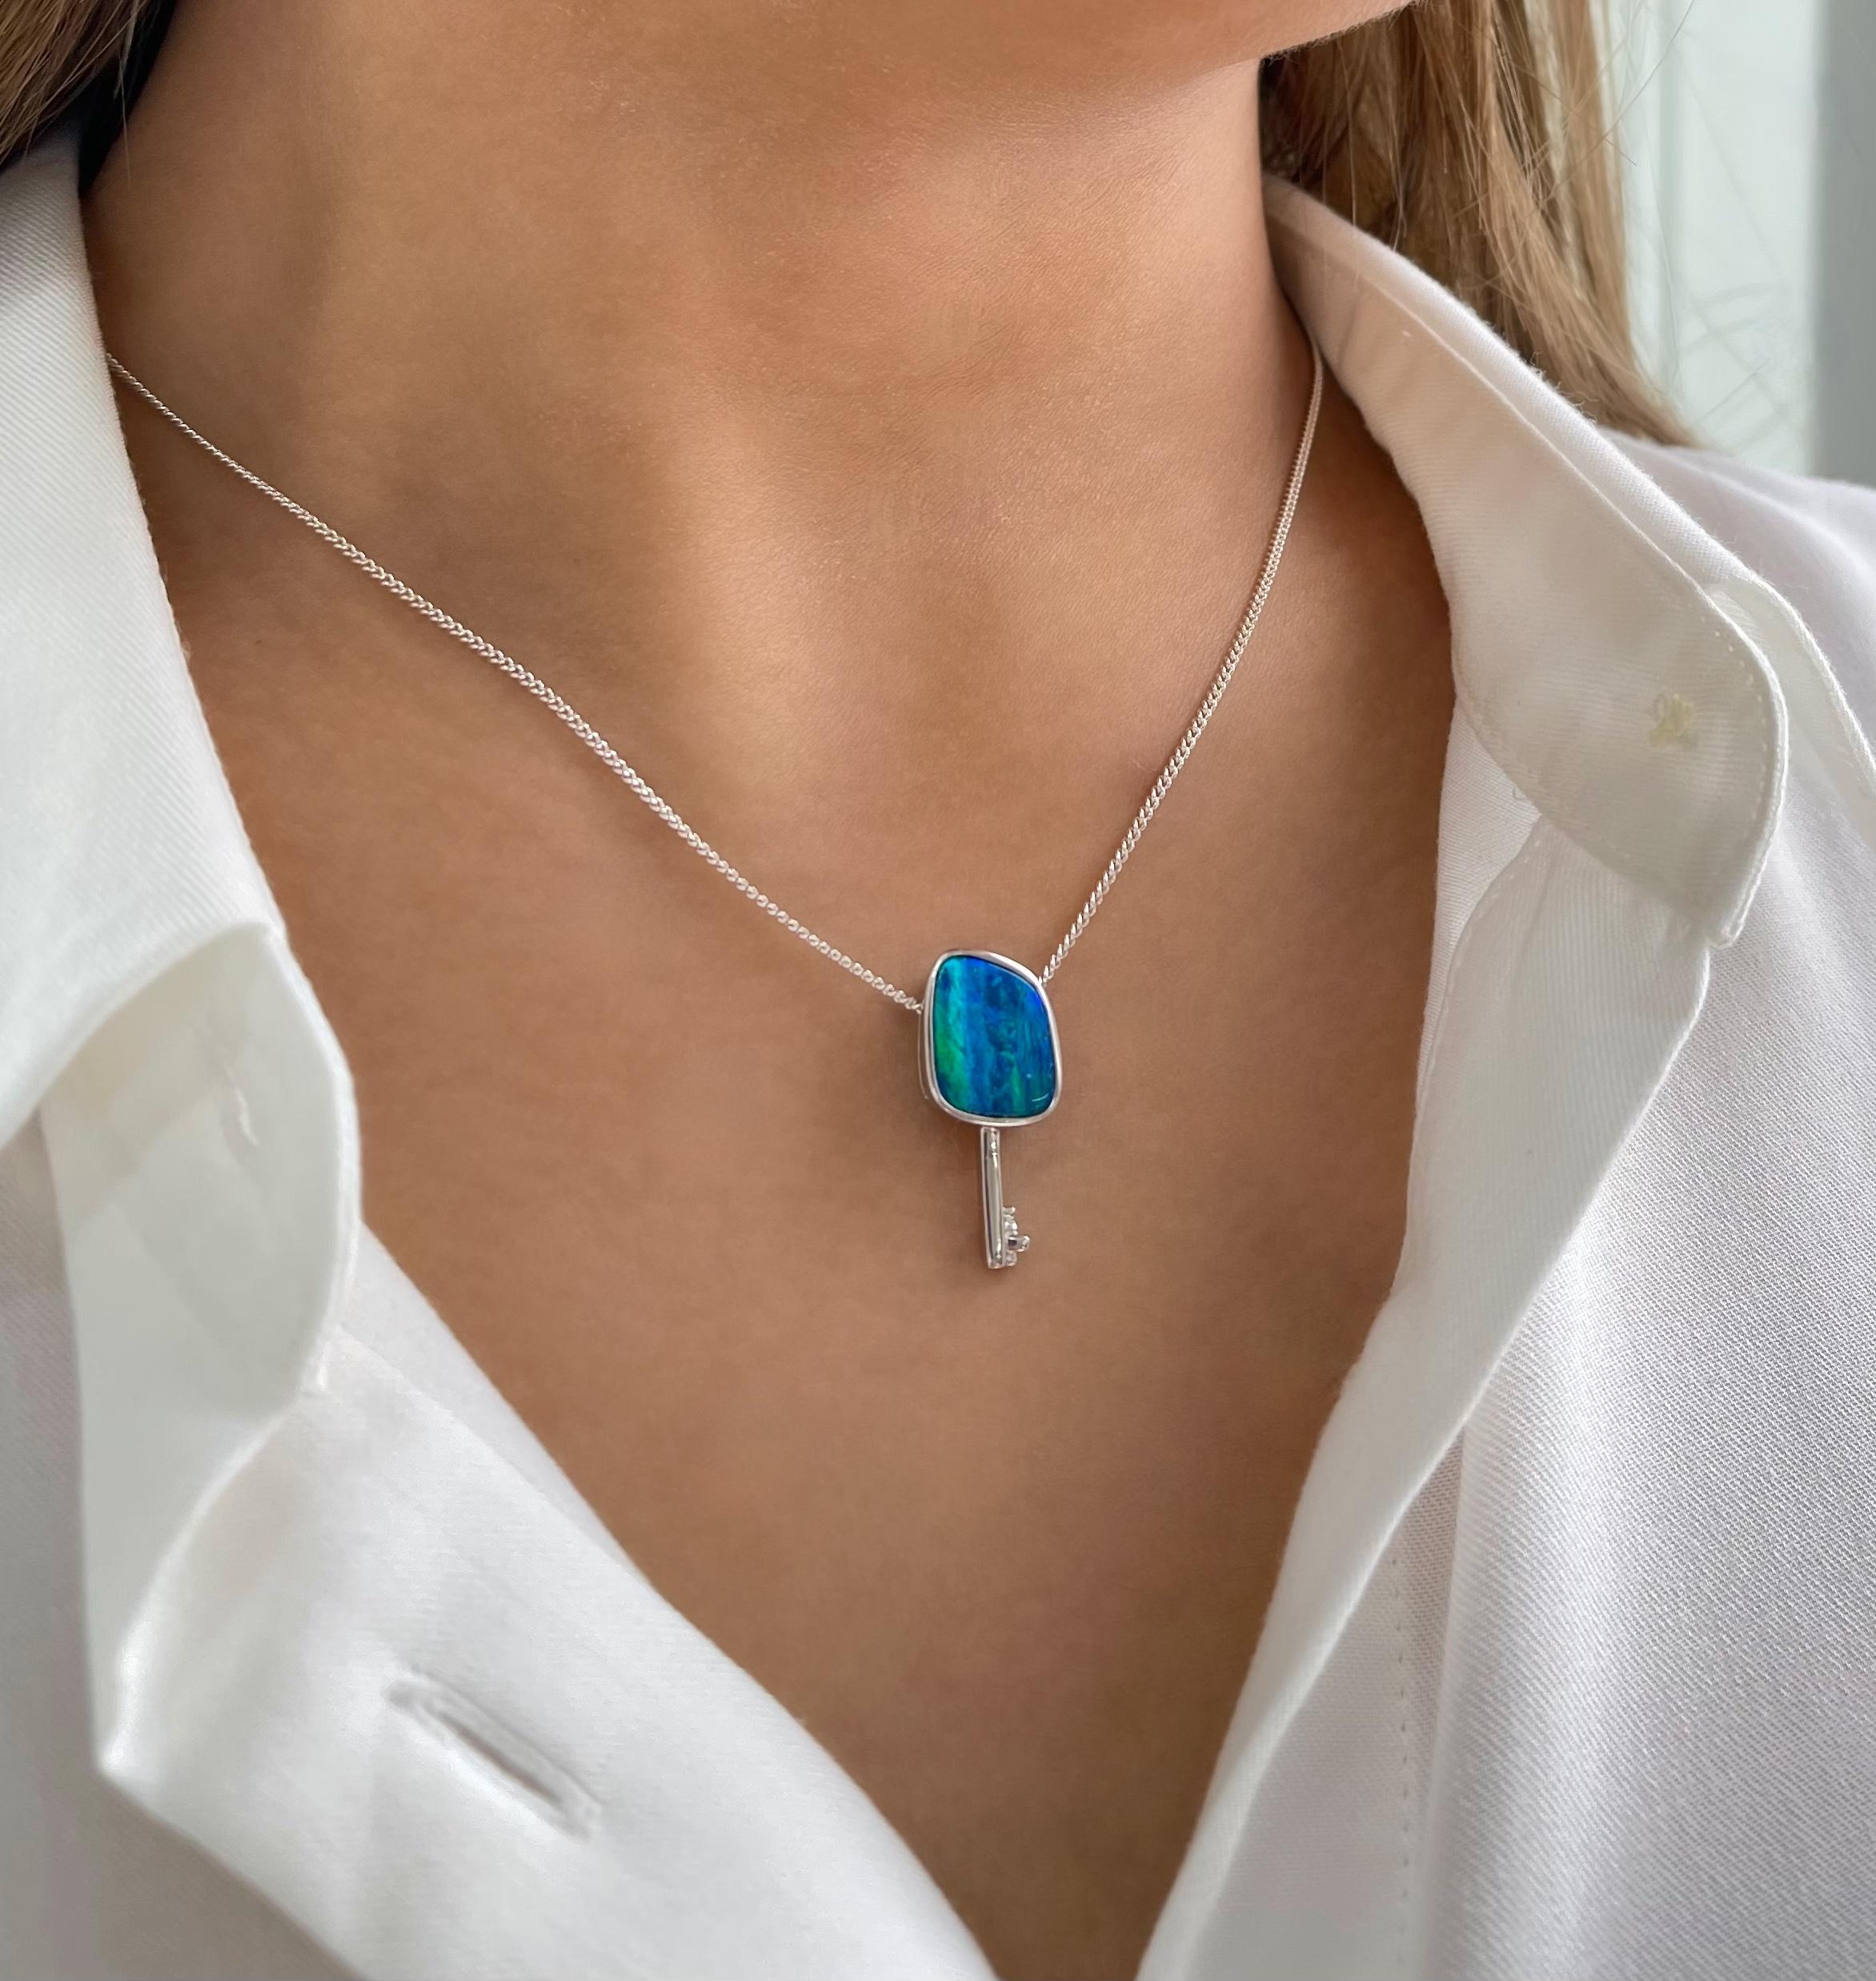 Contemporary Australian Premium Quality 3.44ct Opal Doublet Pendant in Sterling Silver